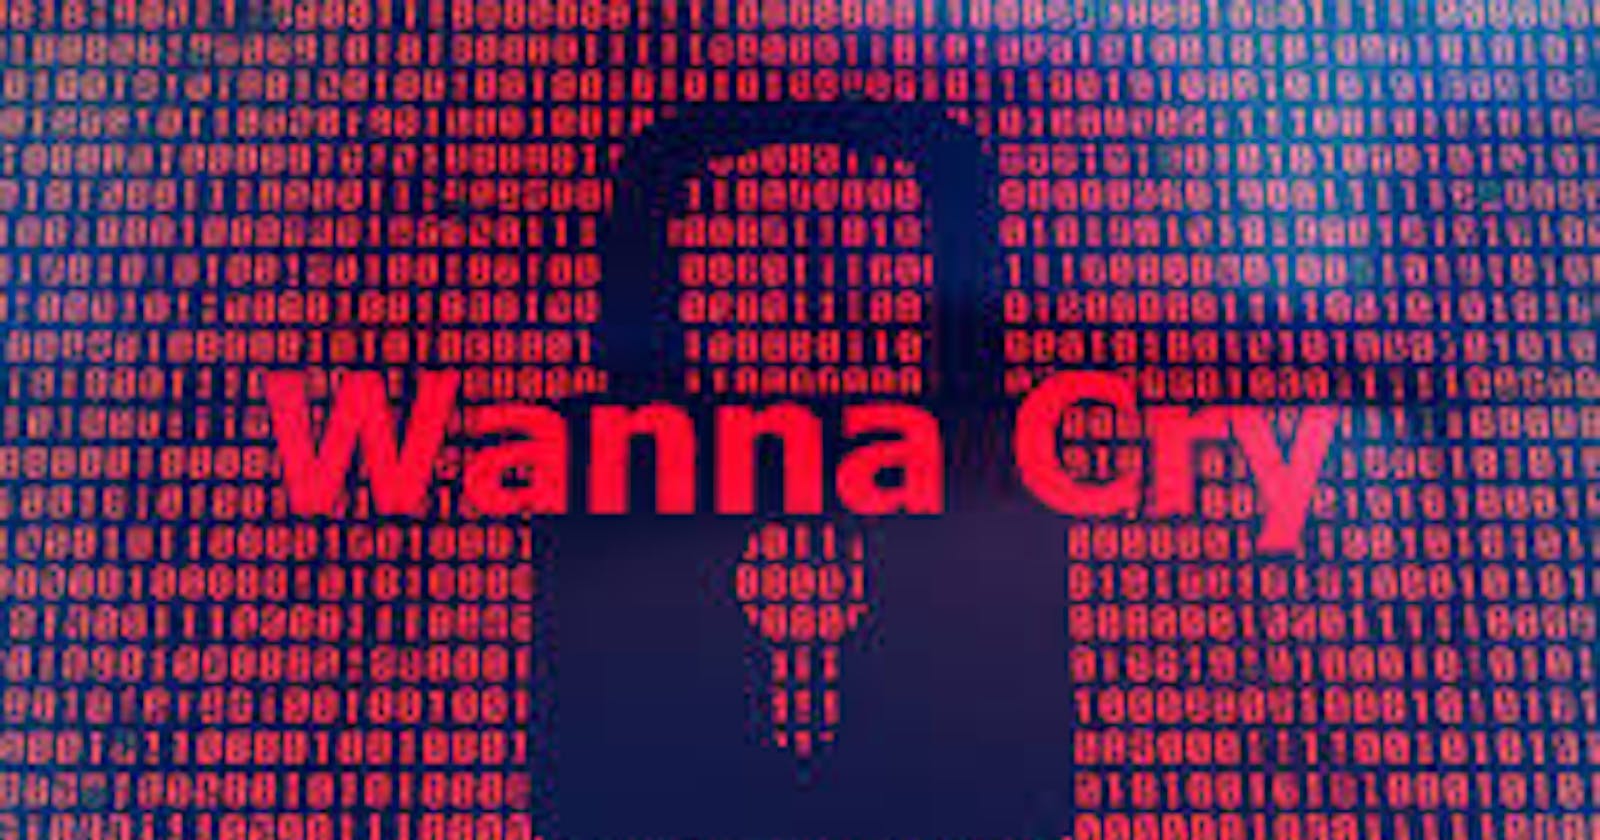 Who's responsible for WannaCry Ransomware?